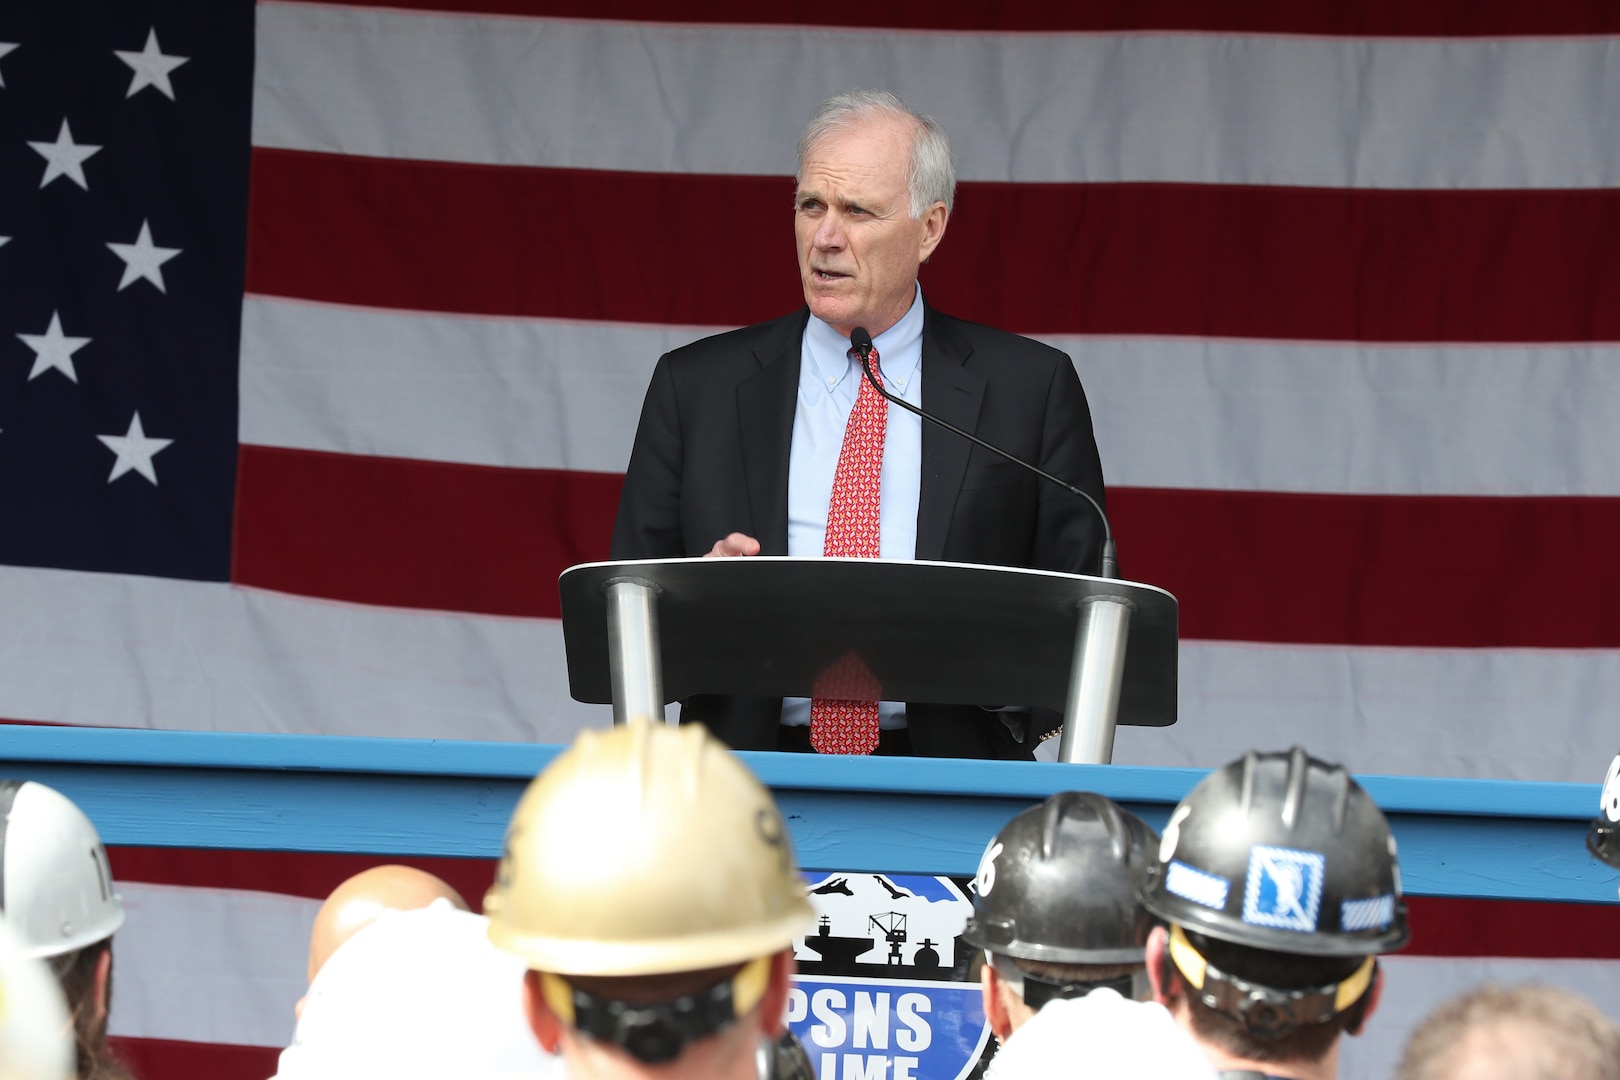 Secretary of the Navy Richard V. Spencer addressed members of the Puget Sound Naval Shipyard & Intermediate Maintenance Facility workforce Sept. 20, 2019, in Bremerton, Wash., before touring key projects and facilities during his hour-and-45-minute visit to the shipyard.